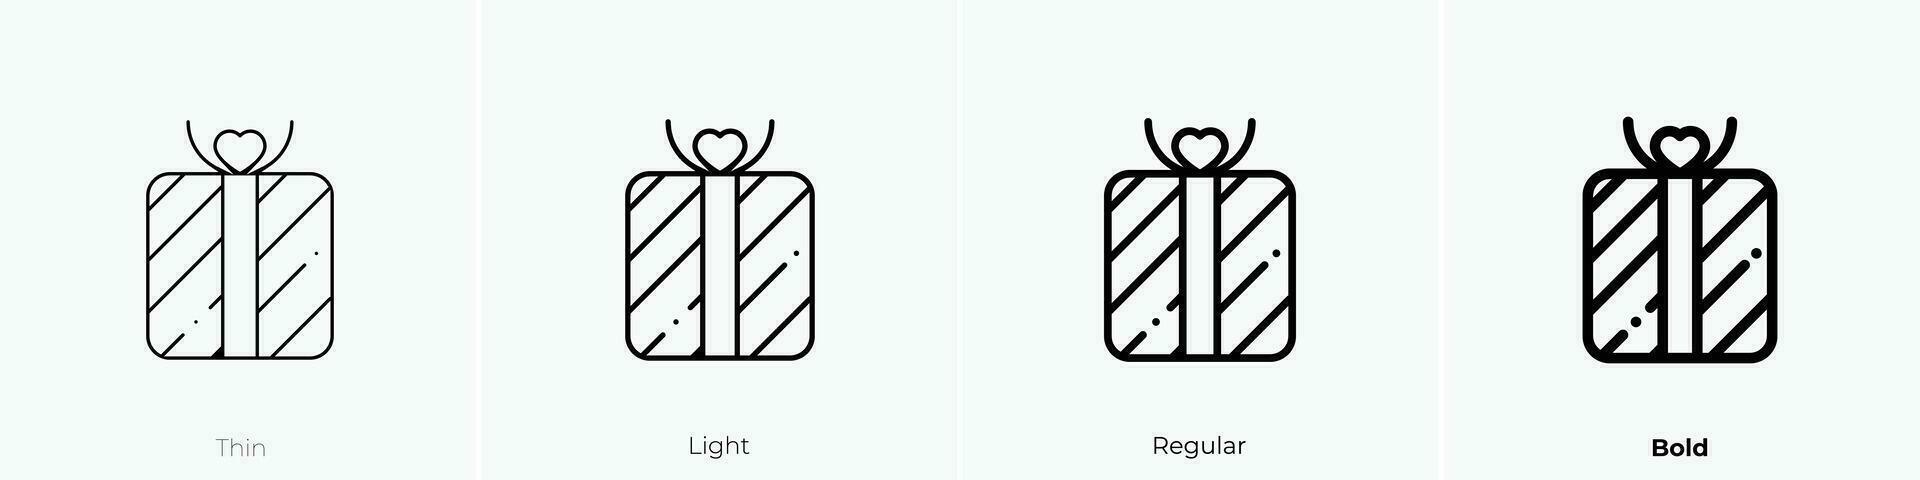 present icon. Thin, Light, Regular And Bold style design isolated on white background vector